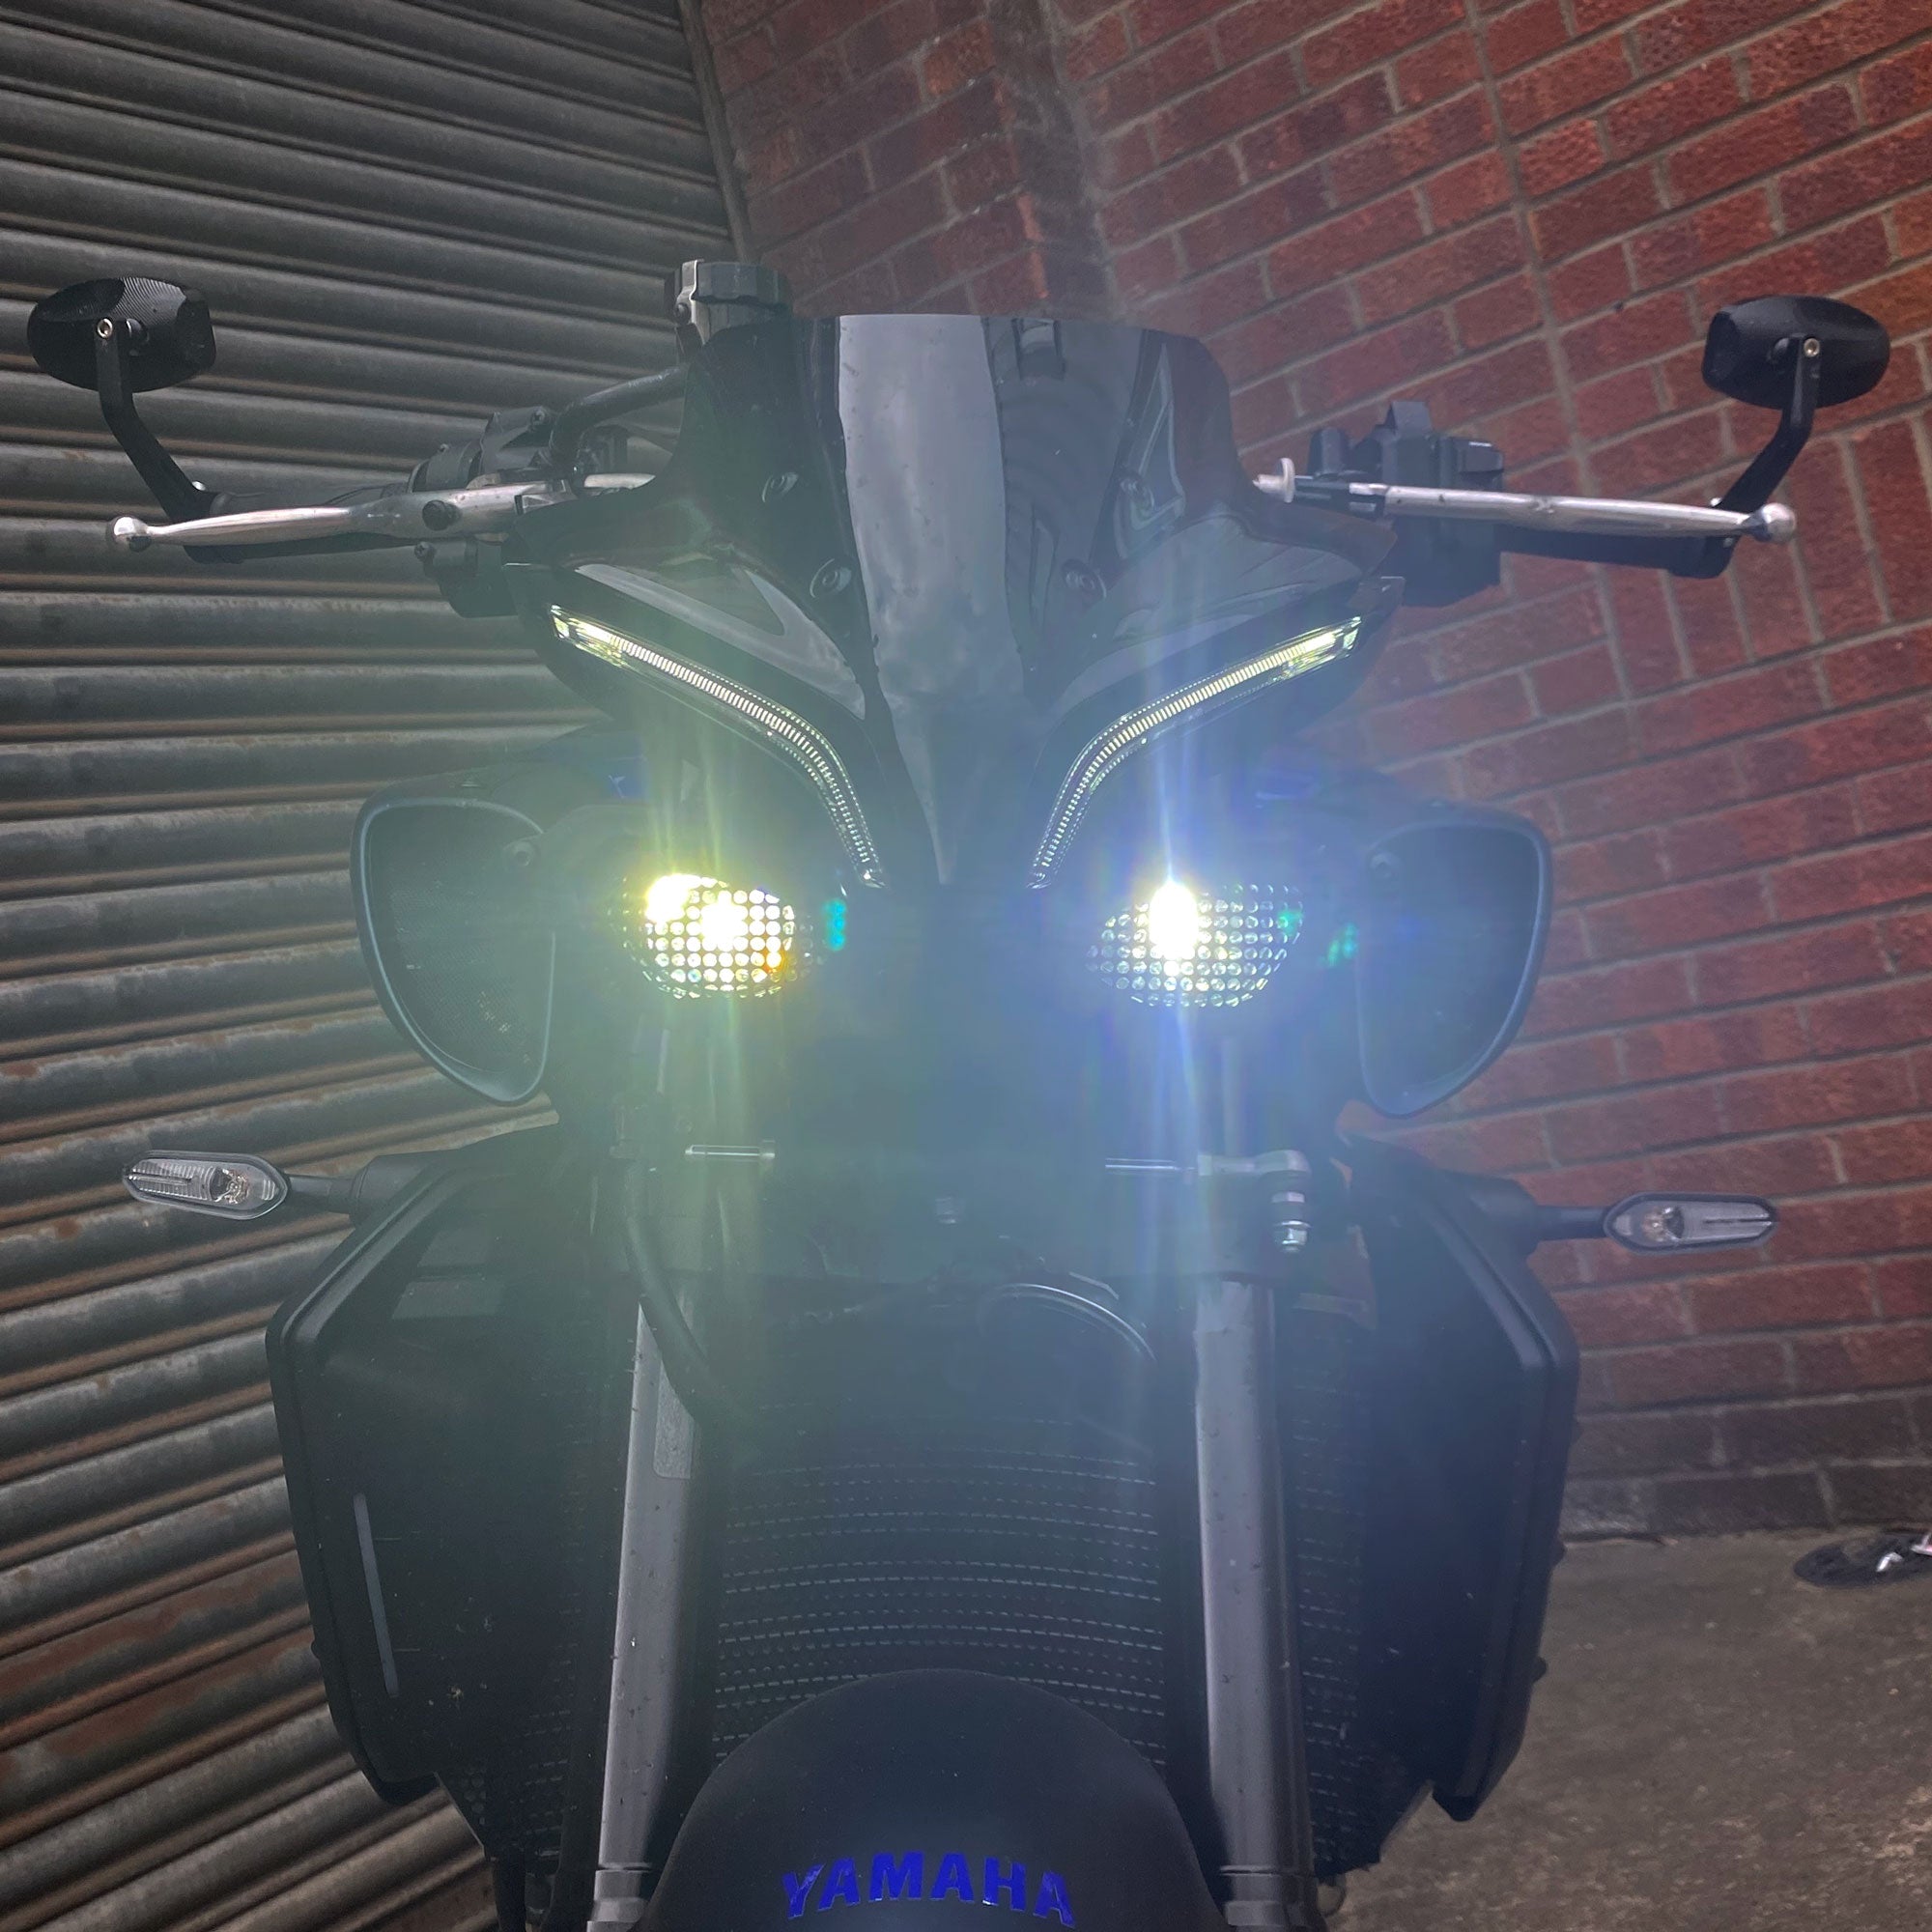 Pyramid Lower Headlight Guards | Matte Black | Yamaha MT-10 2022>Current-32270M-Headlight Protection-Pyramid Motorcycle Accessories